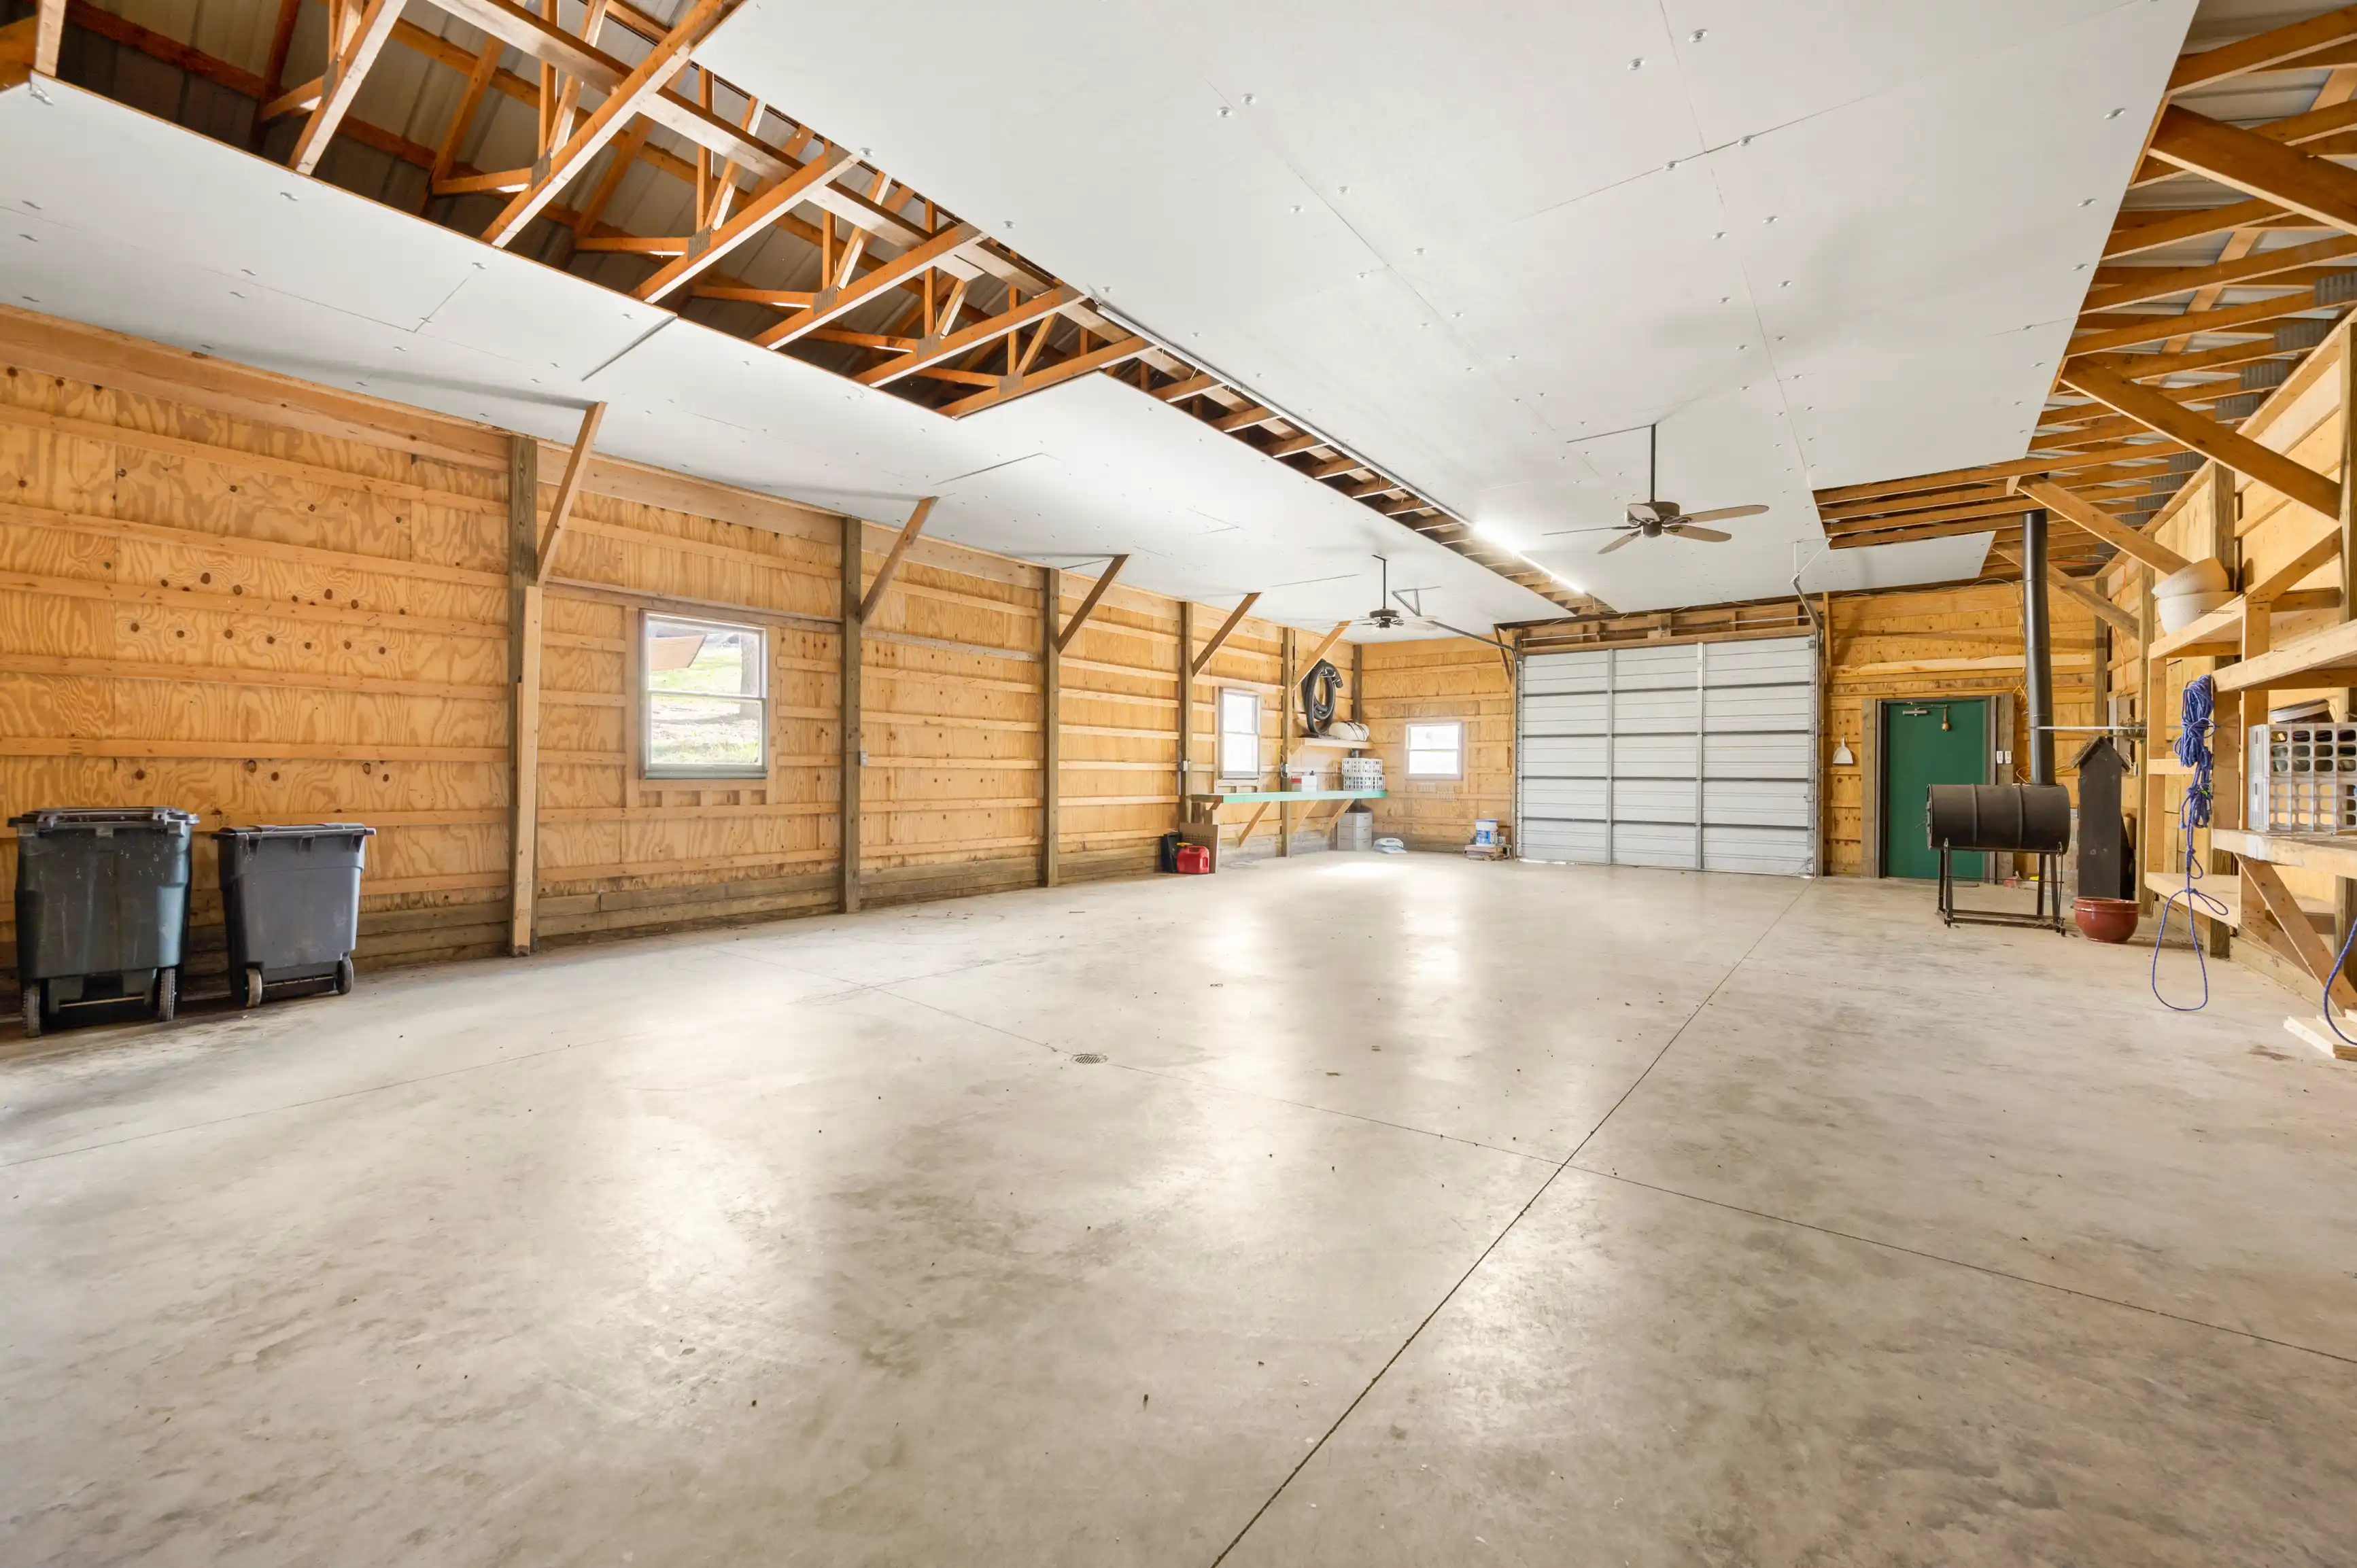 Spacious empty garage interior with wooden walls, concrete floor, and an open ceiling showing rafters.